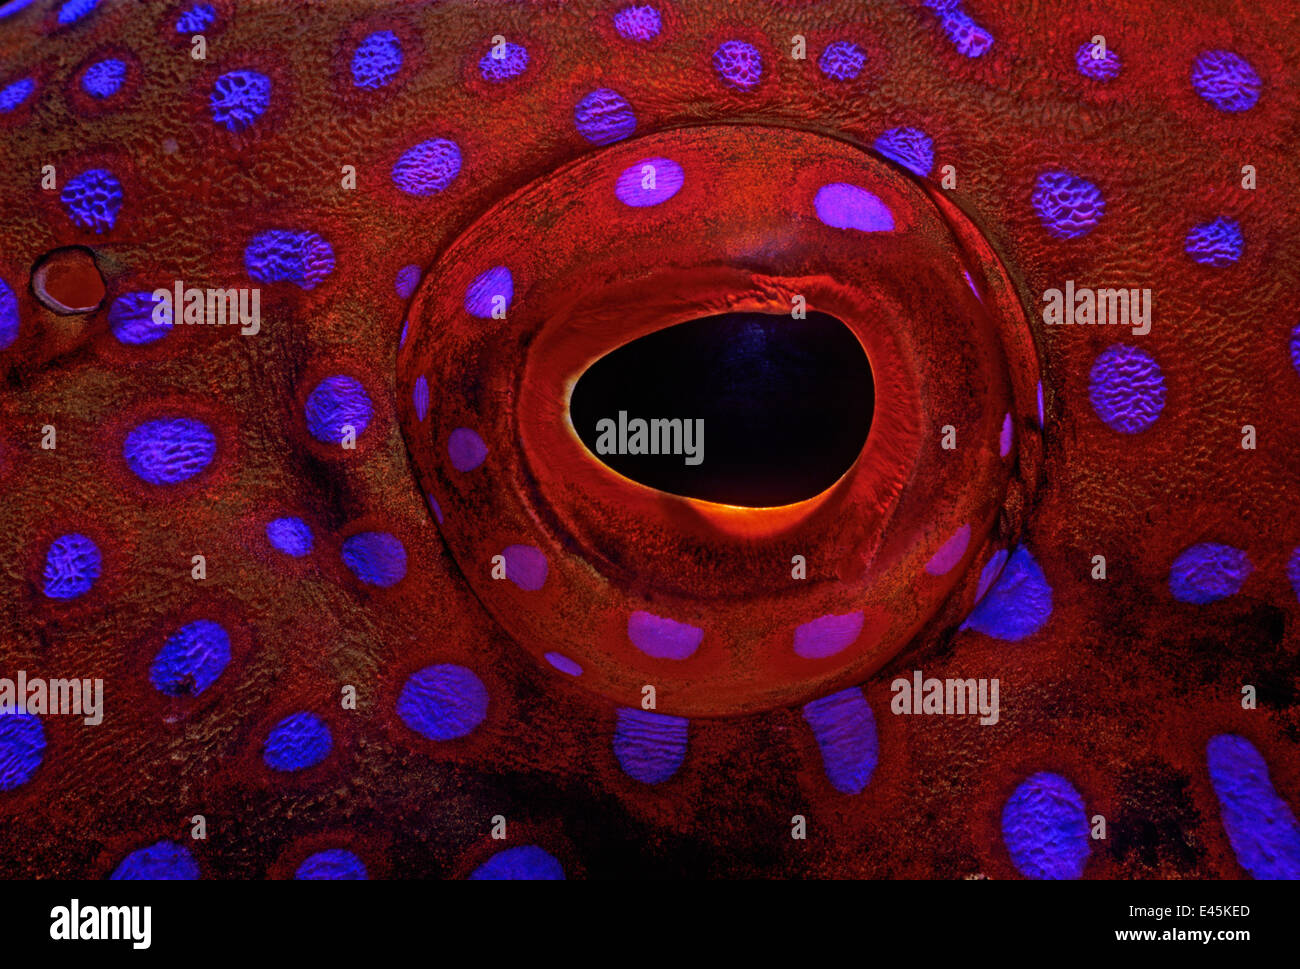 Close-up of the eye of a Jewel Grouper / Coral hind (Cephalopholis Miniata) Red Sea, Egypt Stock Photo